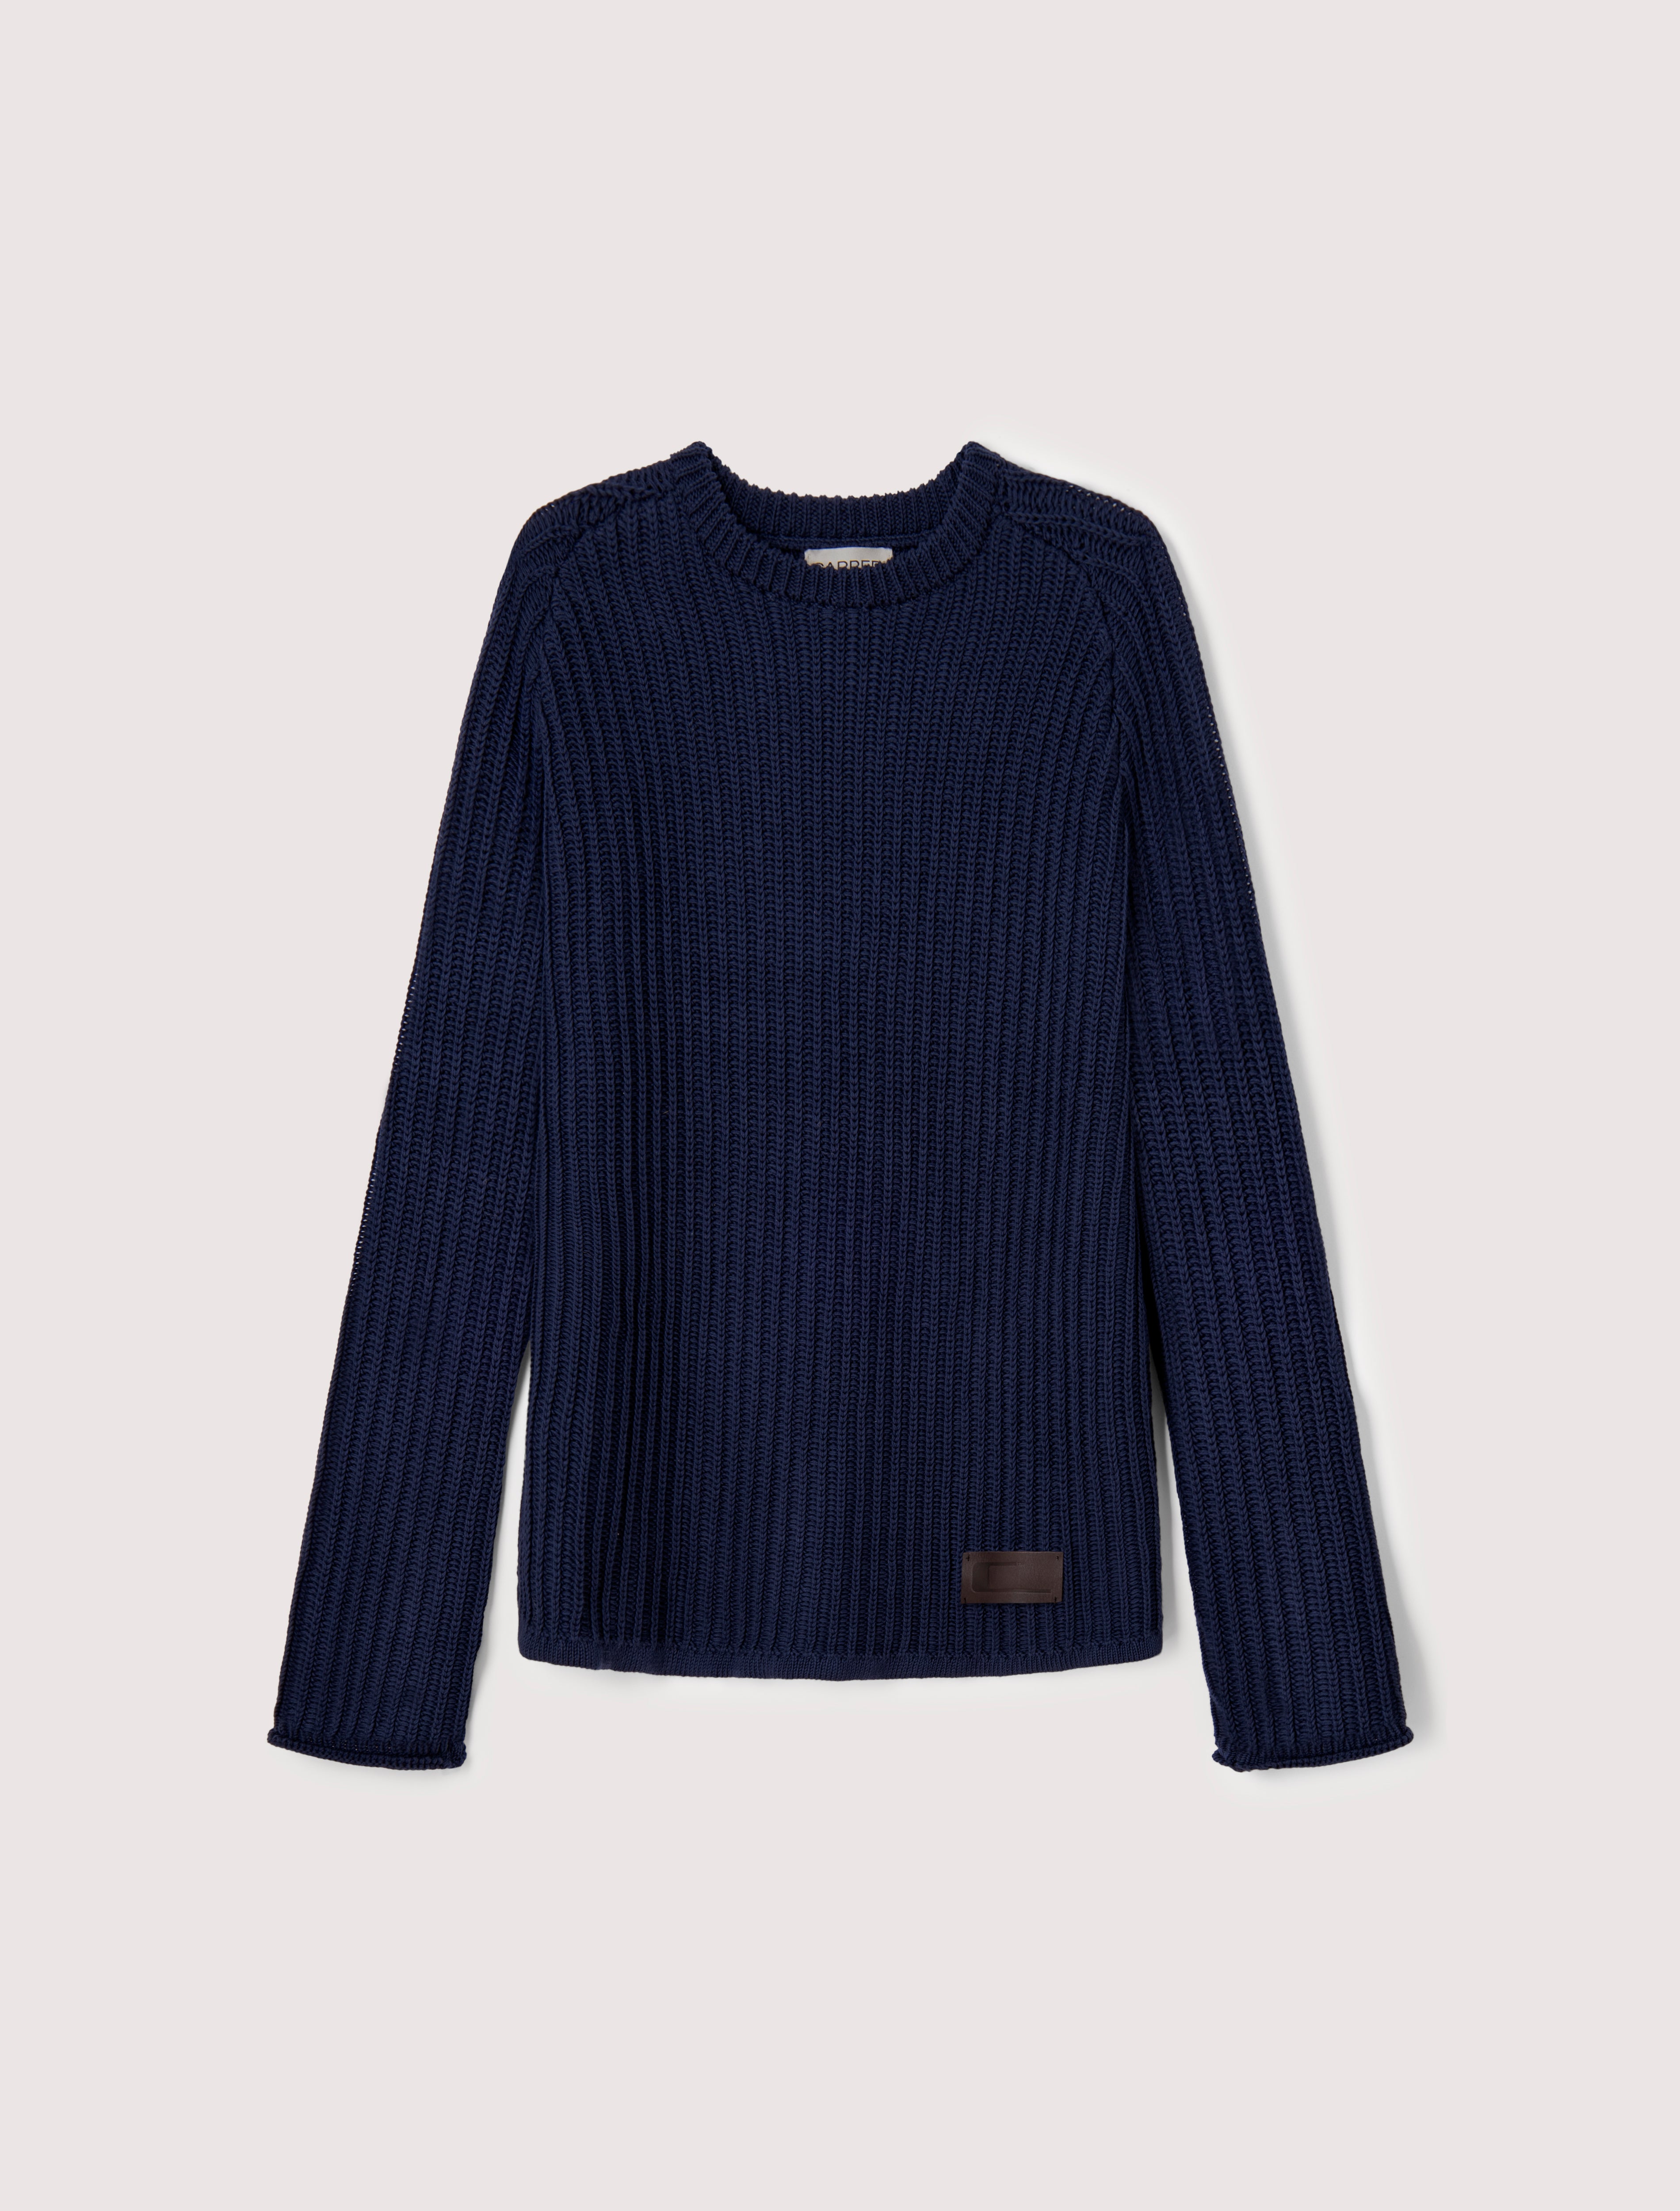 CARRER_ALBA KNITTED CREW NECK IN BLUE